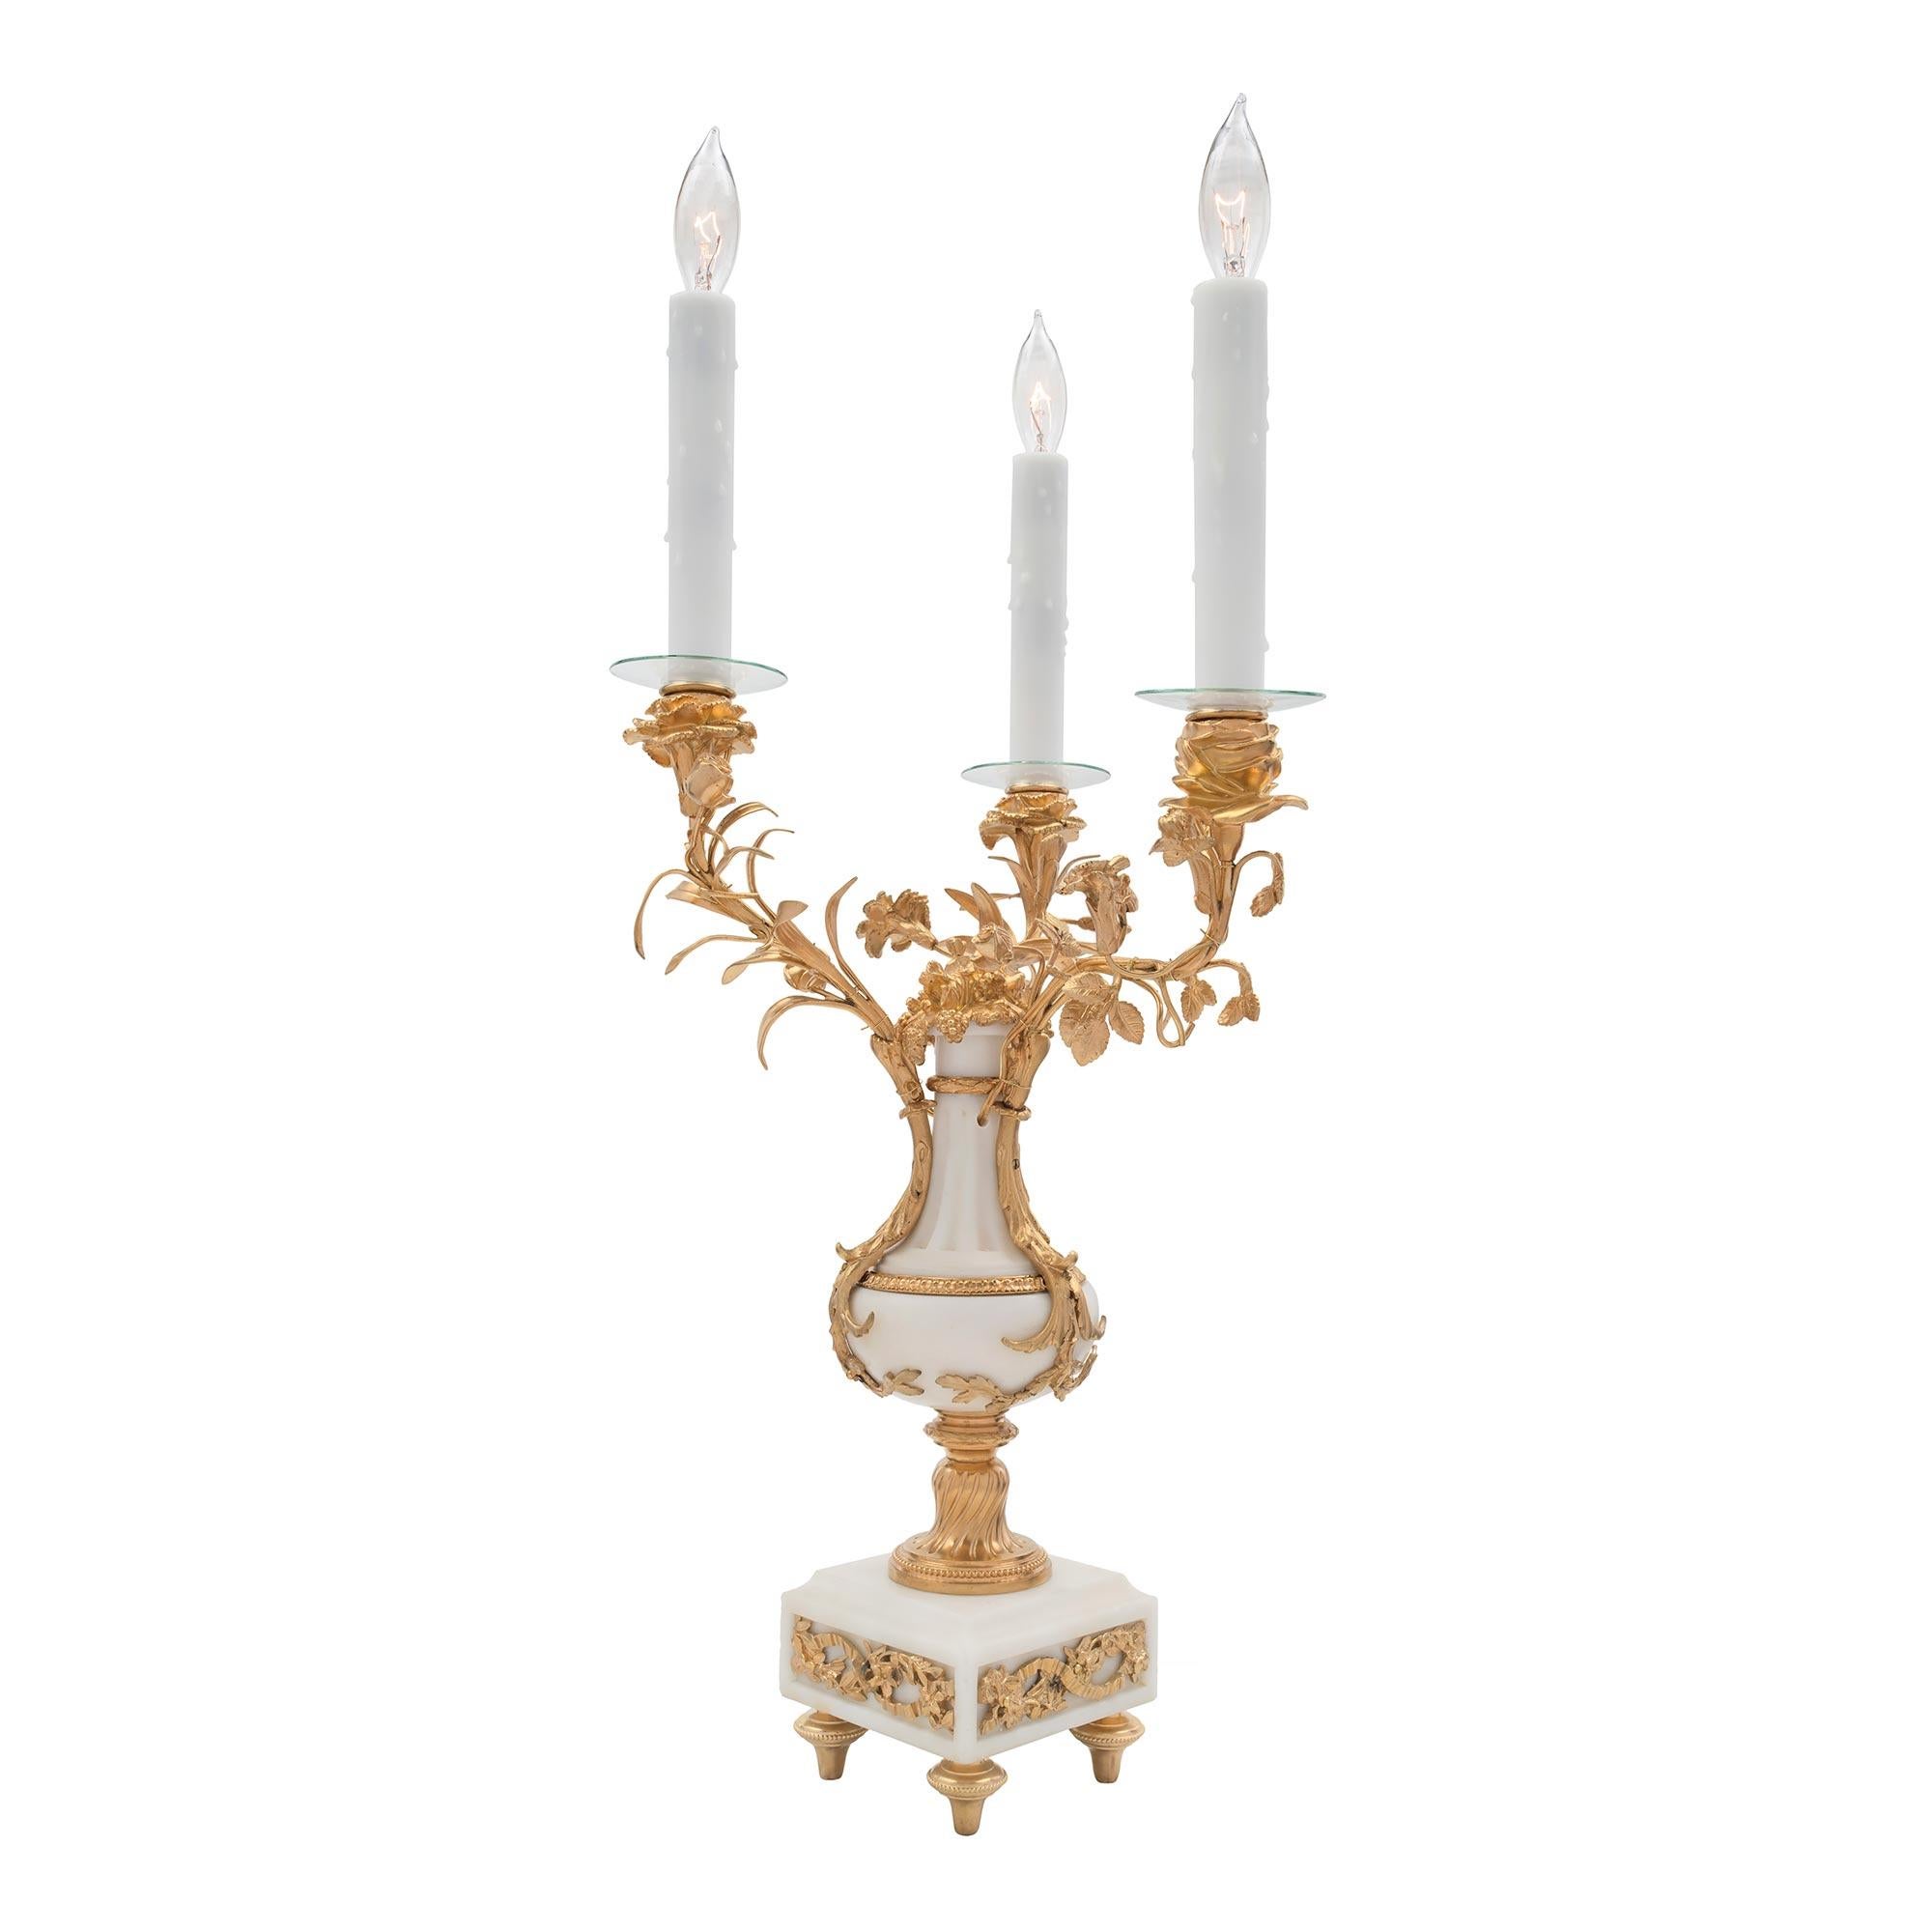 Pair of French 19th Century Louis XVI Style Three-Arm Electrified Candelabras In Good Condition For Sale In West Palm Beach, FL